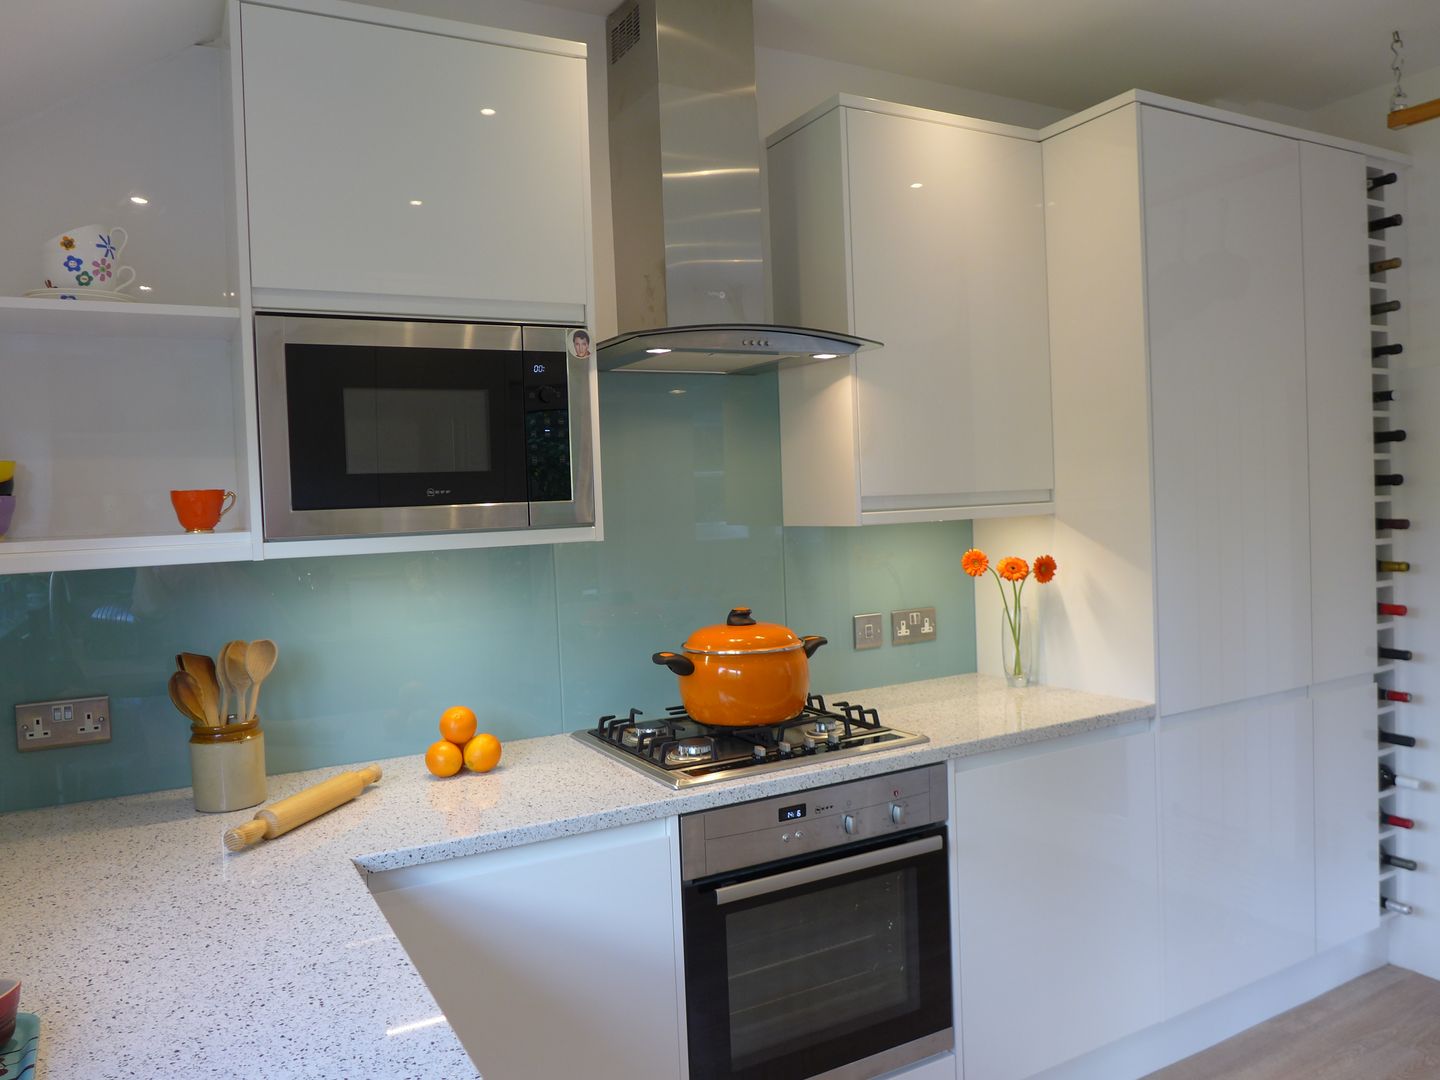 Modern white gloss kitchen Style Within Cozinhas modernas white kitchen,gloss kitchen,modern kitchen,flat kitchen cabinet,integrated microwave,integrated handle,kitchen lighting,glass splashback,kitchen splashback,blue splashback,quartz worktop,white worktop